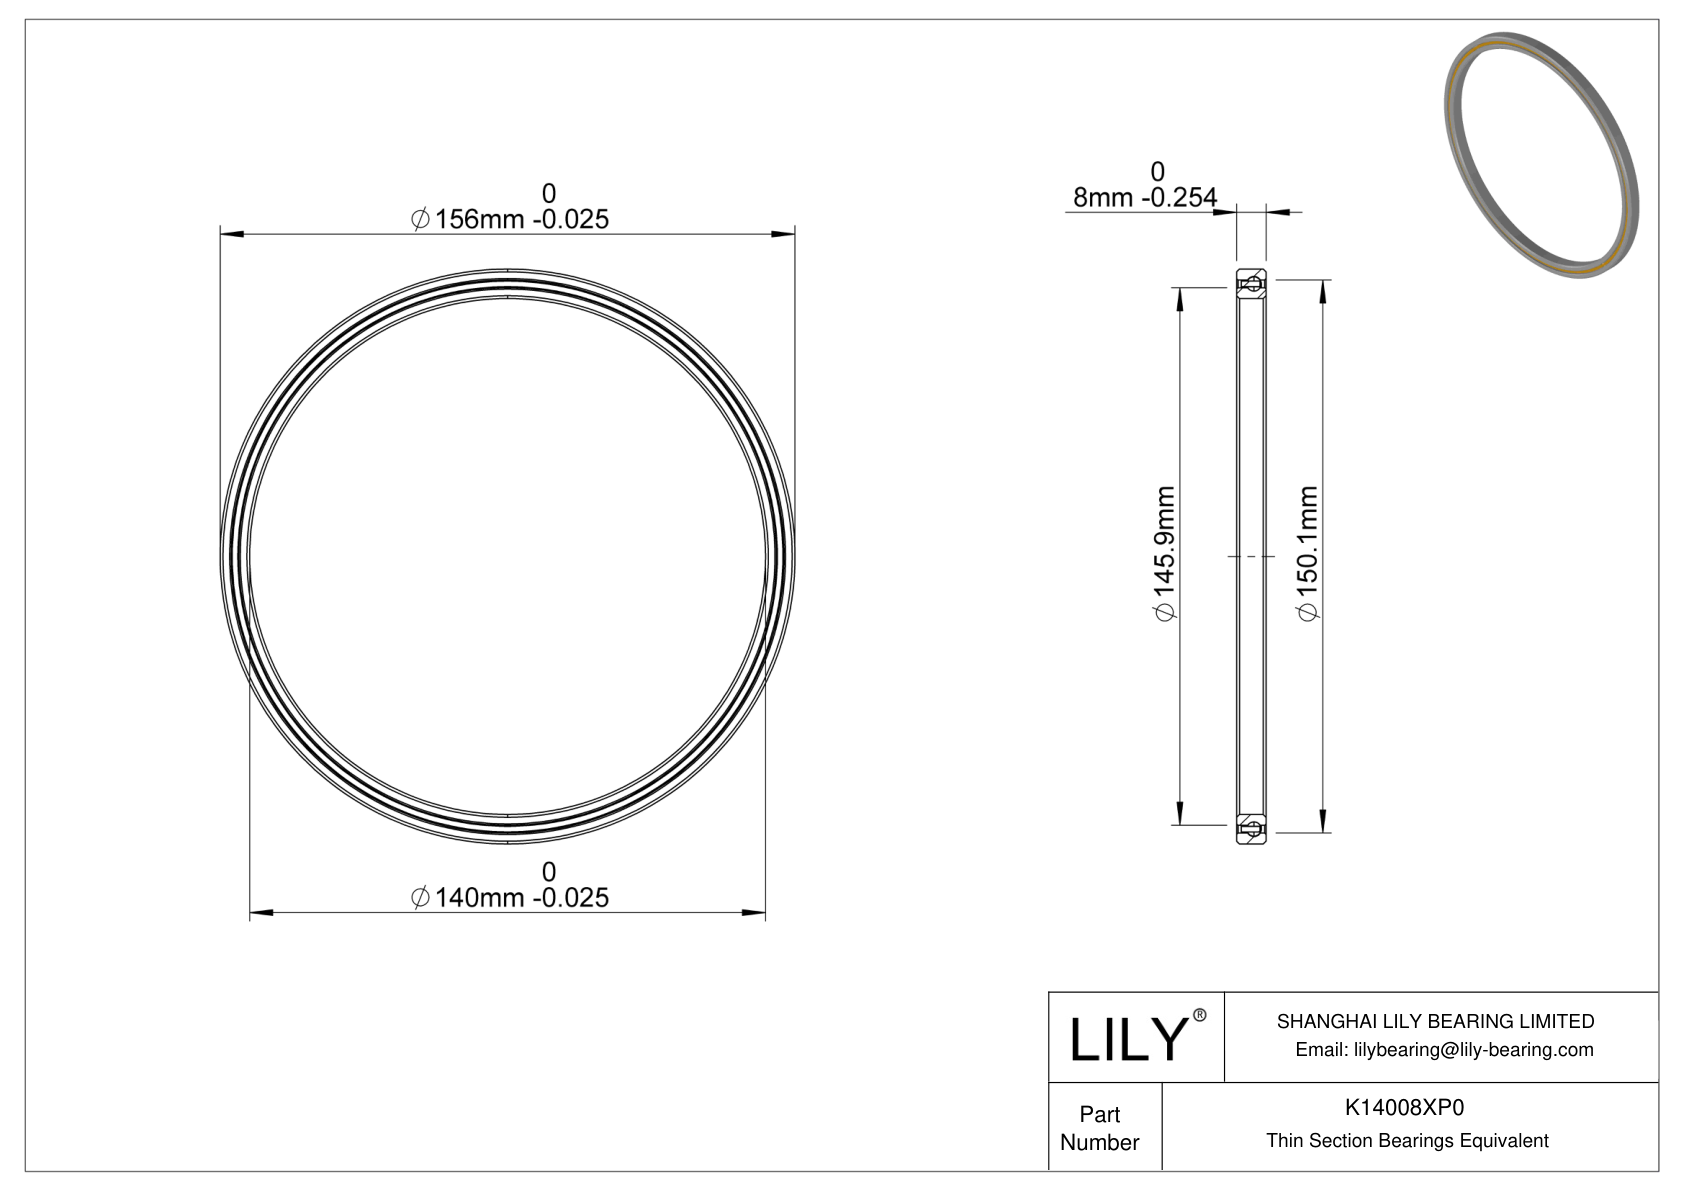 K14008XP0 Constant Section (CS) Bearings cad drawing